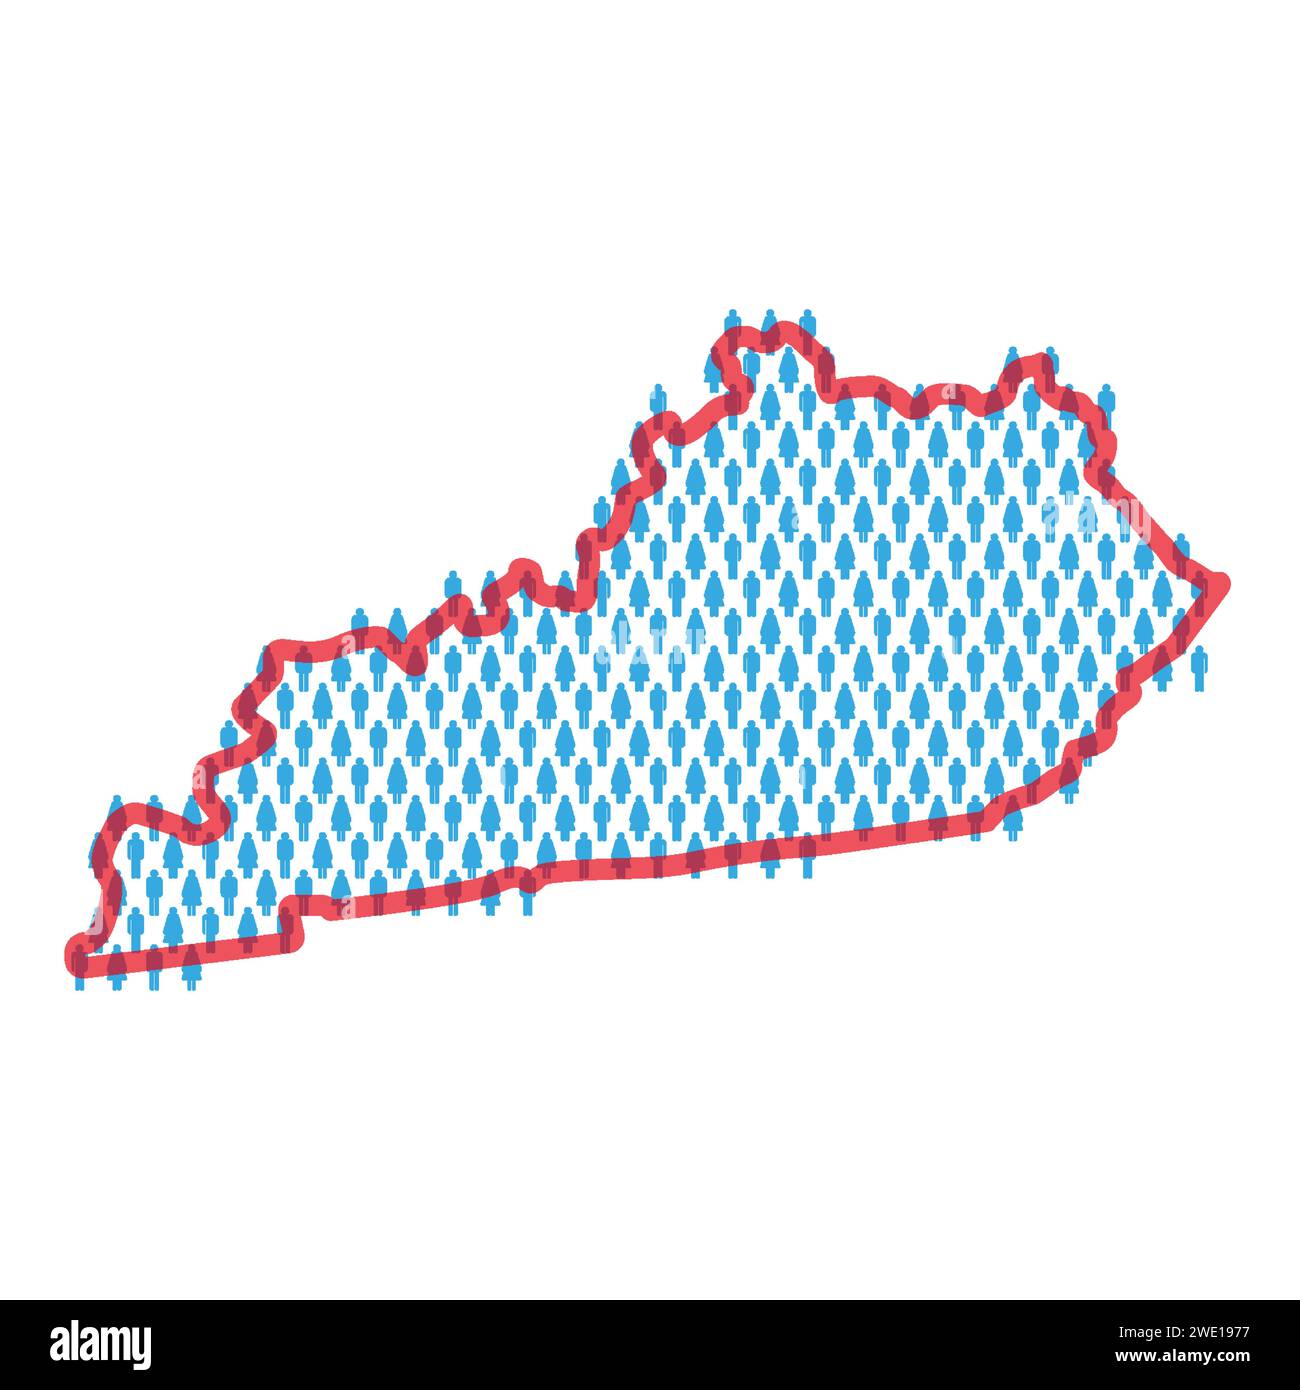 Kentucky population map. Stick figures people map with bold red translucent state border. Pattern of men and women icons. Isolated vector illustration Stock Vector